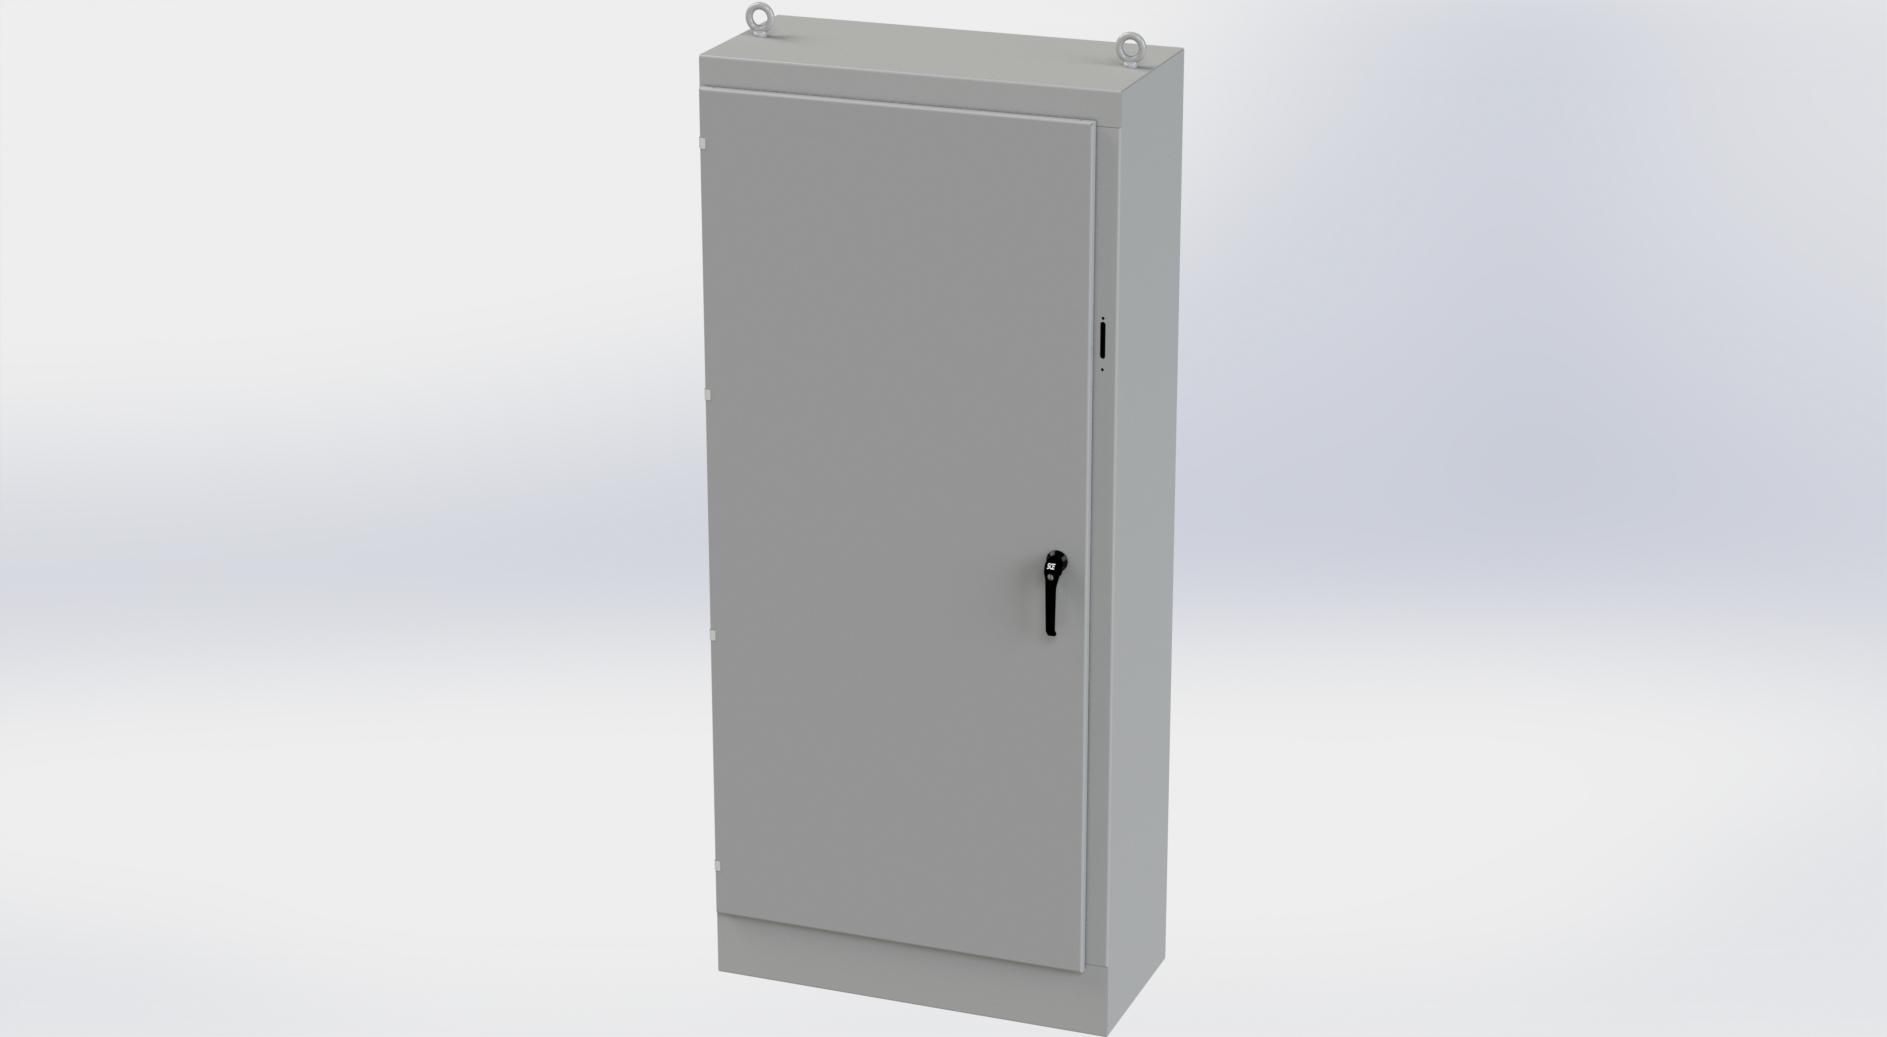 Saginaw Control SCE-90XM4018G 1DR XM Enclosure, Height:90.00", Width:39.50", Depth:18.00", ANSI-61 gray powder coating inside and out. Sub-panels are powder coated white.  